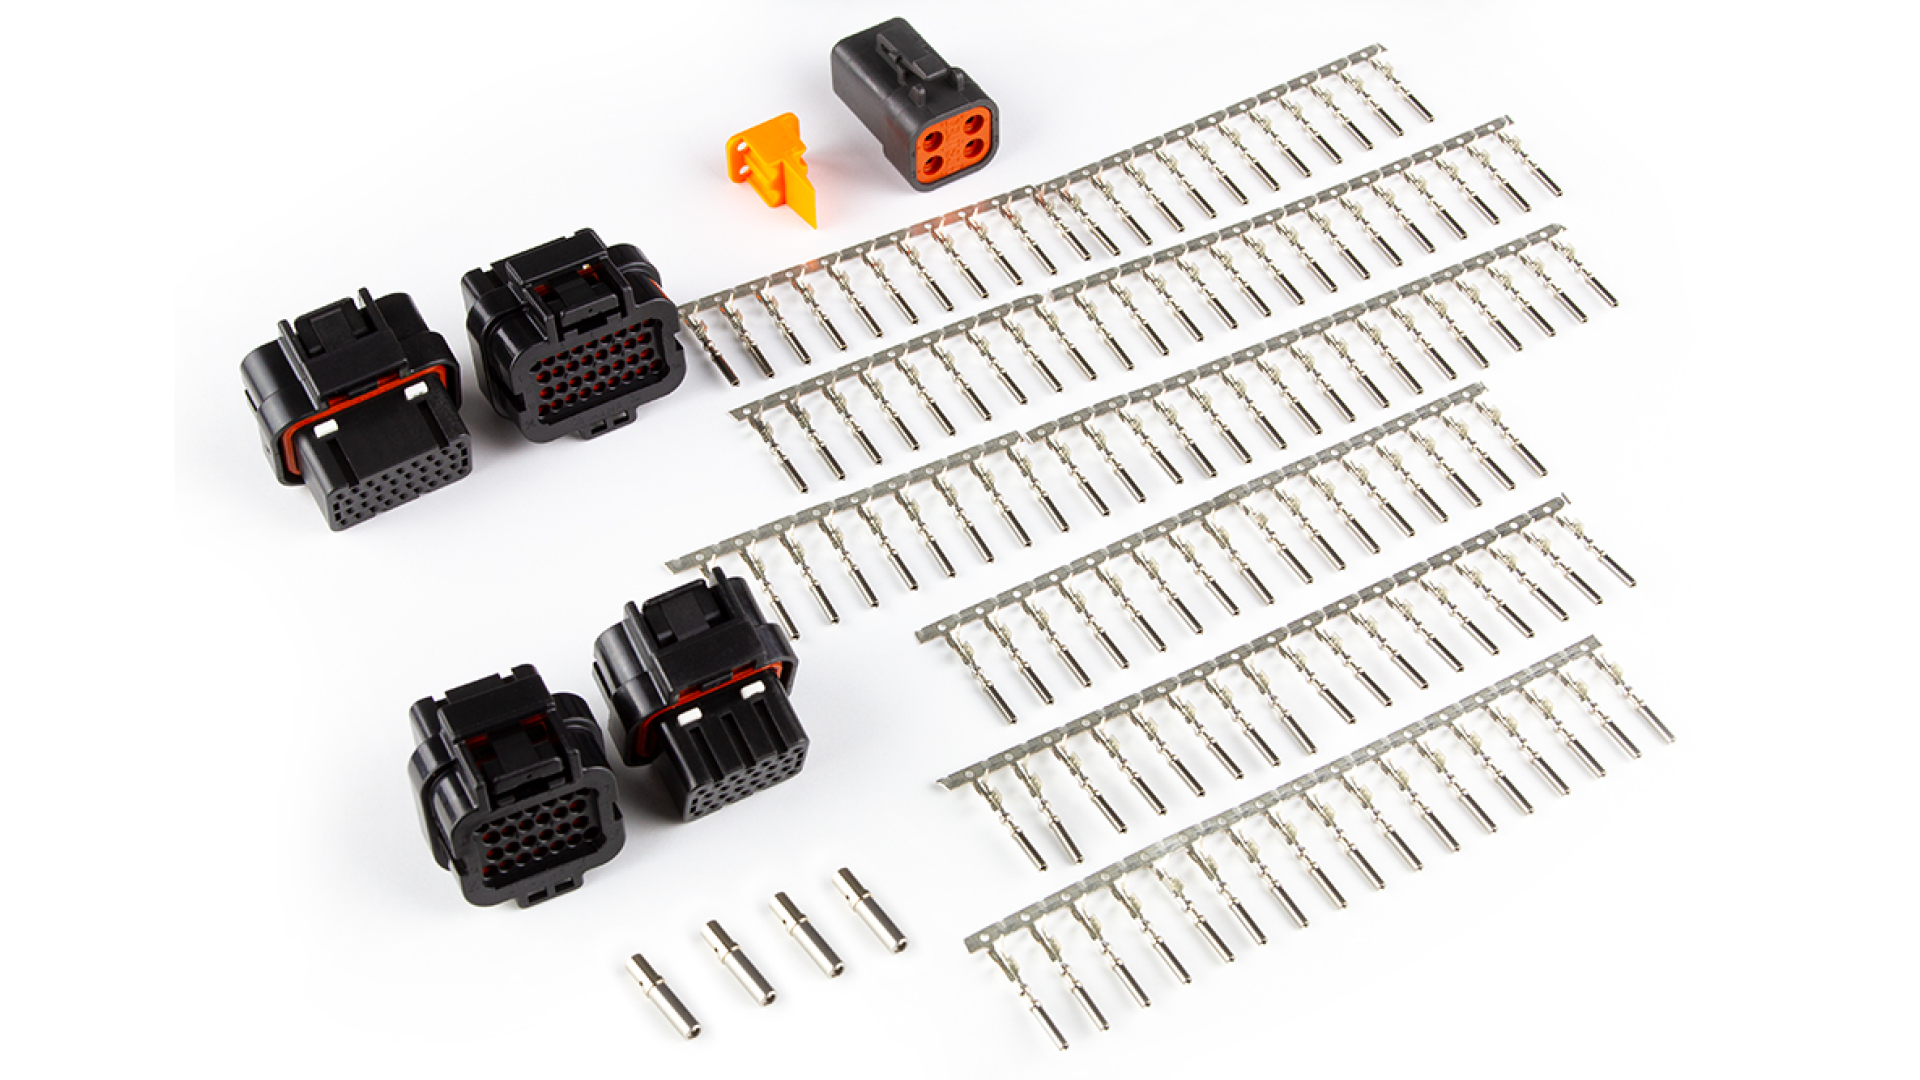 Haltech Set of pins and plugs for Nexus R5